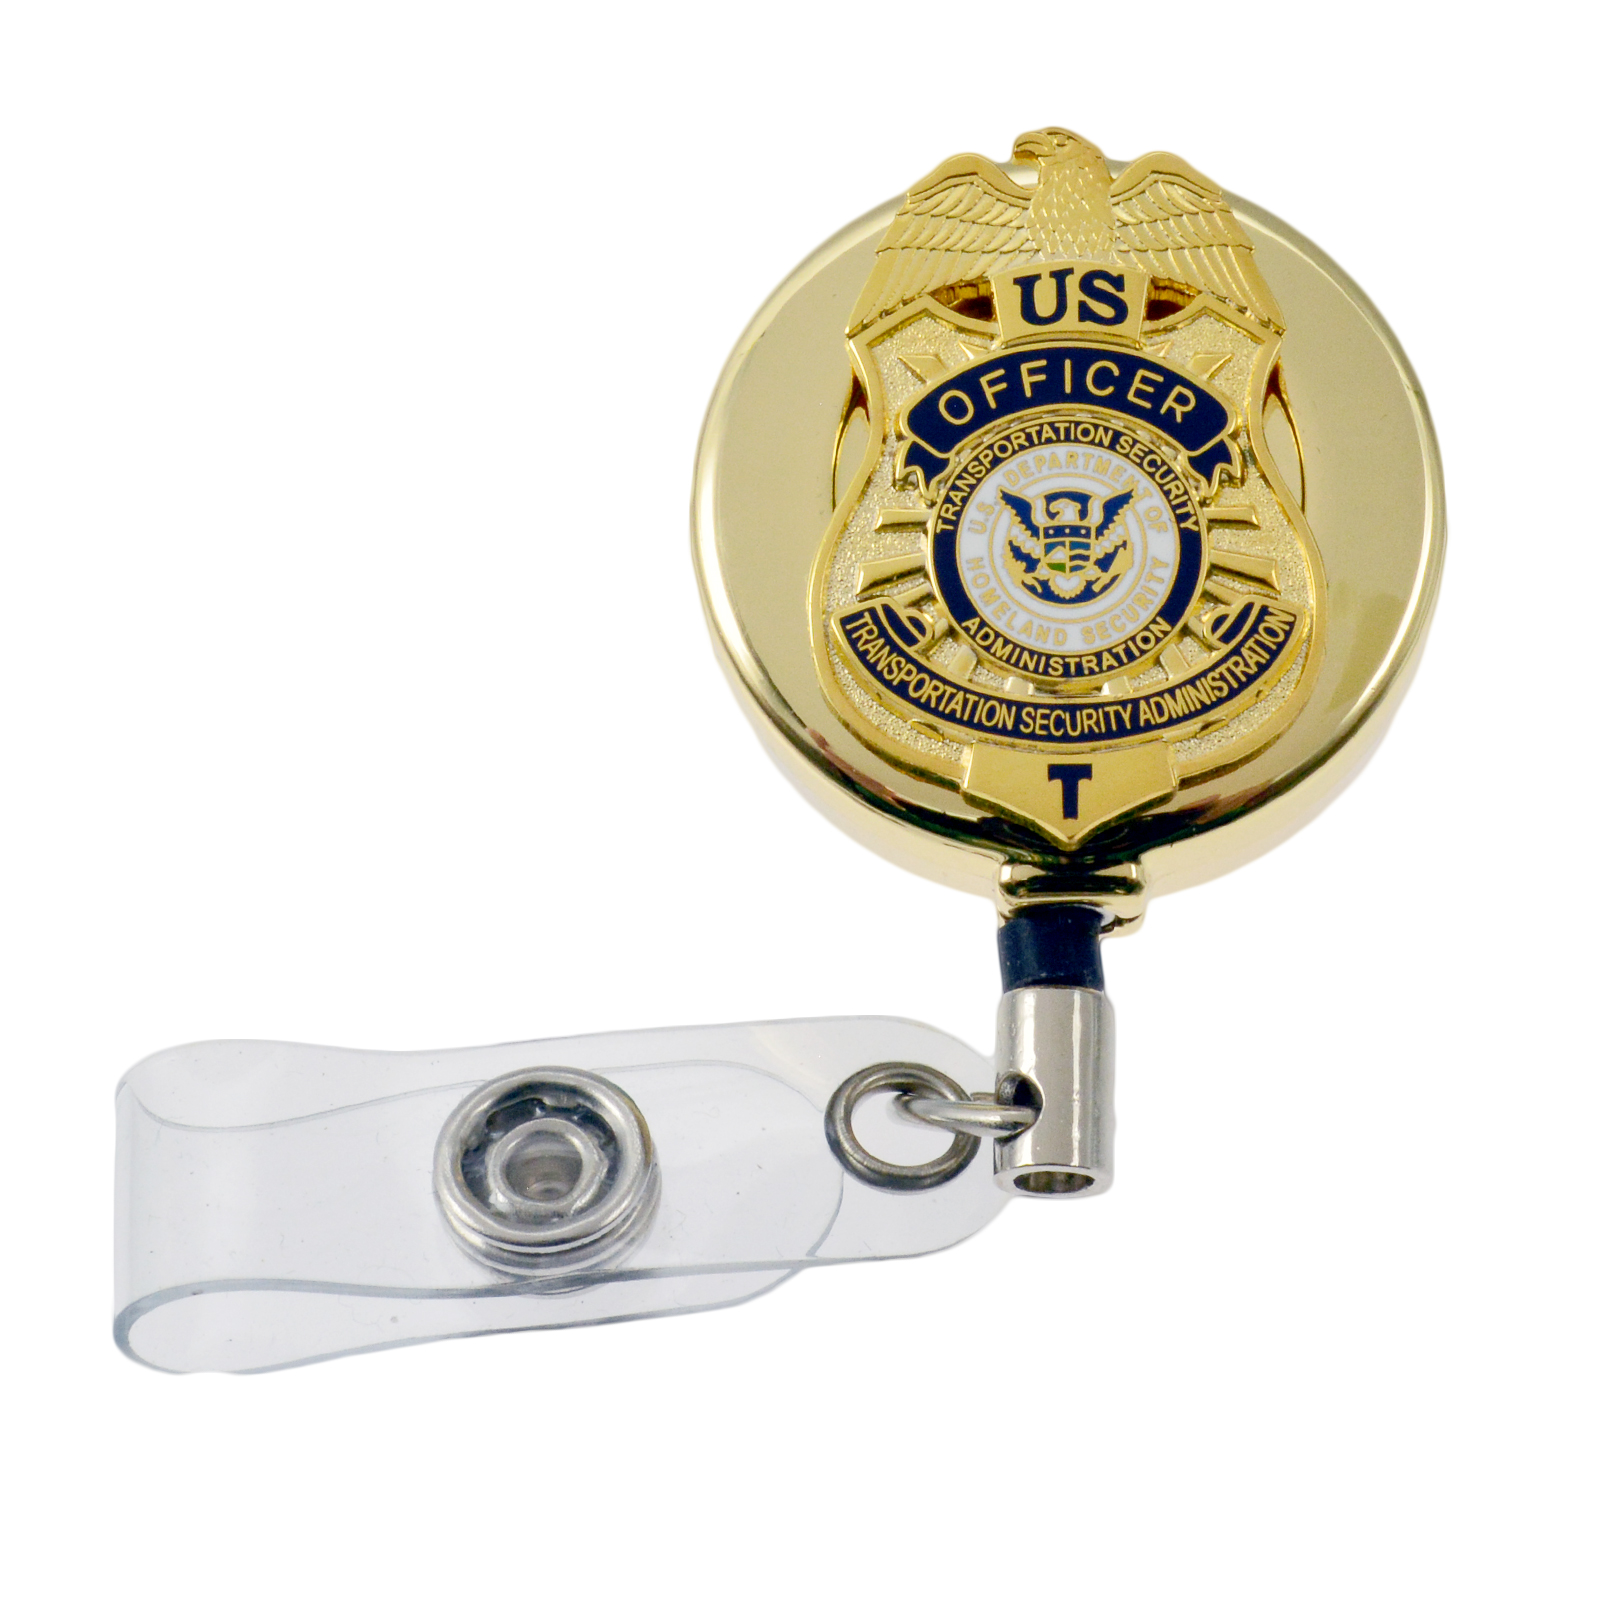 DOD Defense Contract Management Agency DCMA Retractable Security ID Holder Reel (Chrome)